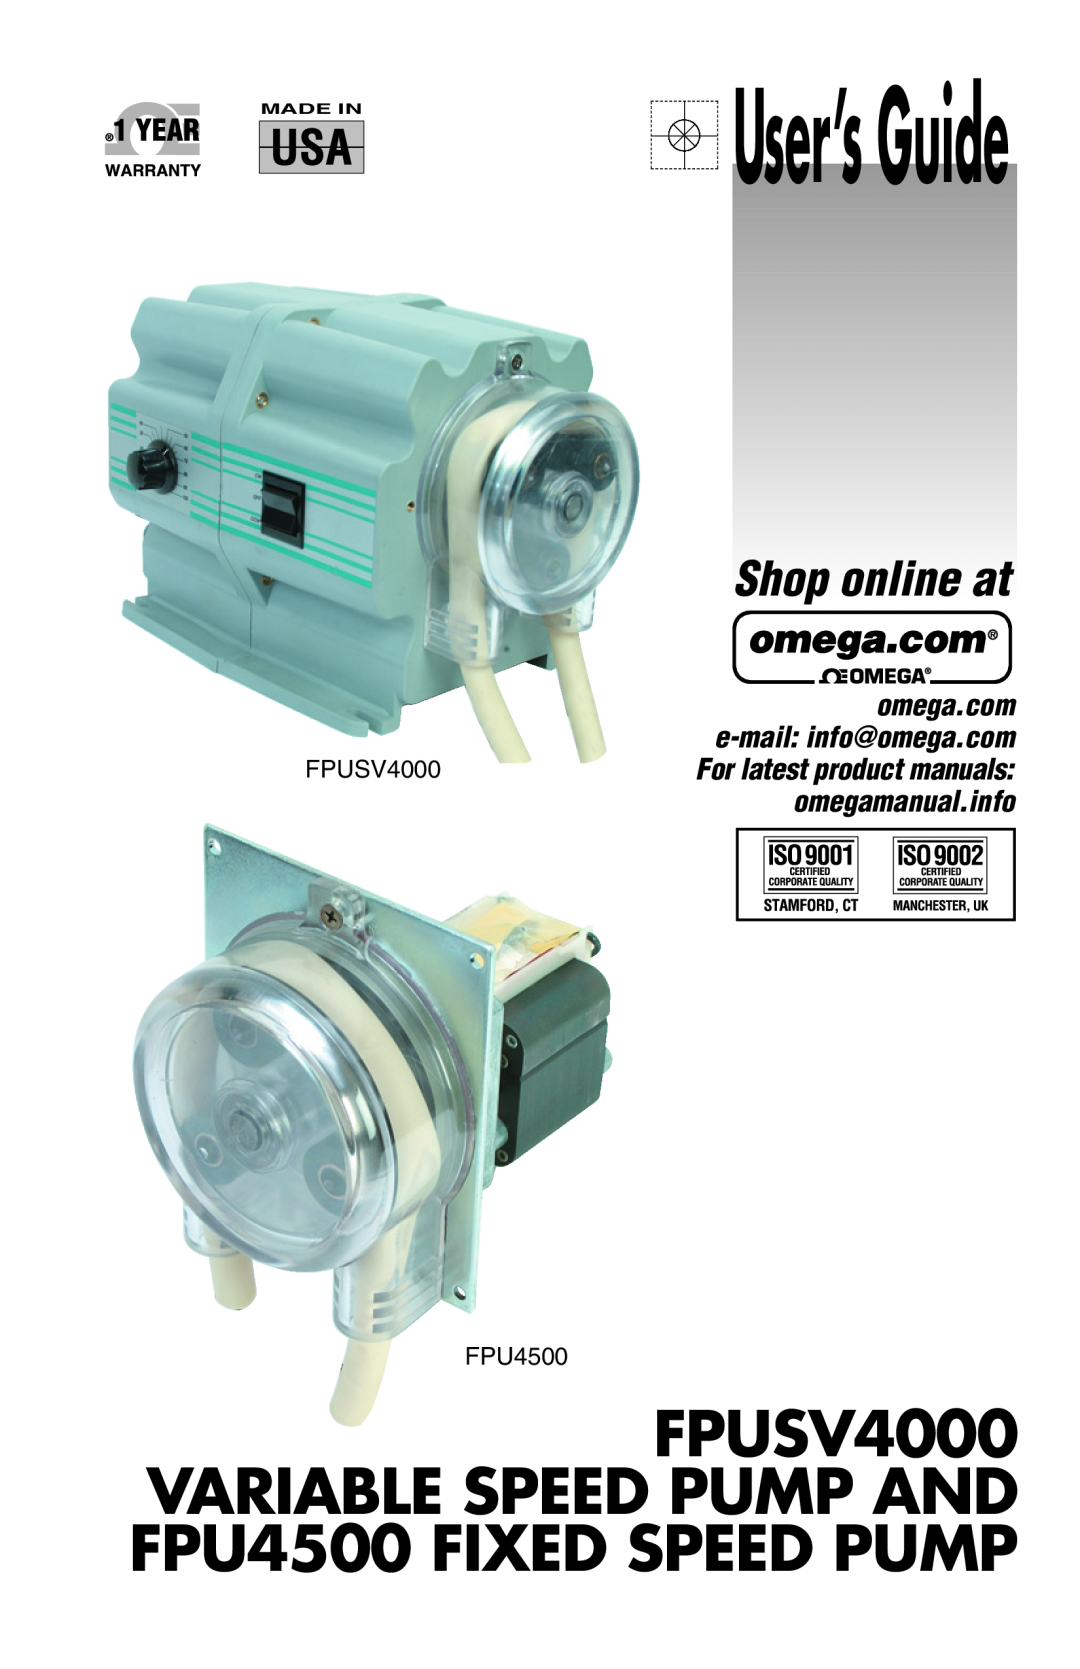 Omega Speaker Systems manual User’s Guide, FPUSV4000, VARIABLE SPEED PUMP AND FPU4500 FIXED SPEED PUMP, Shop online at 